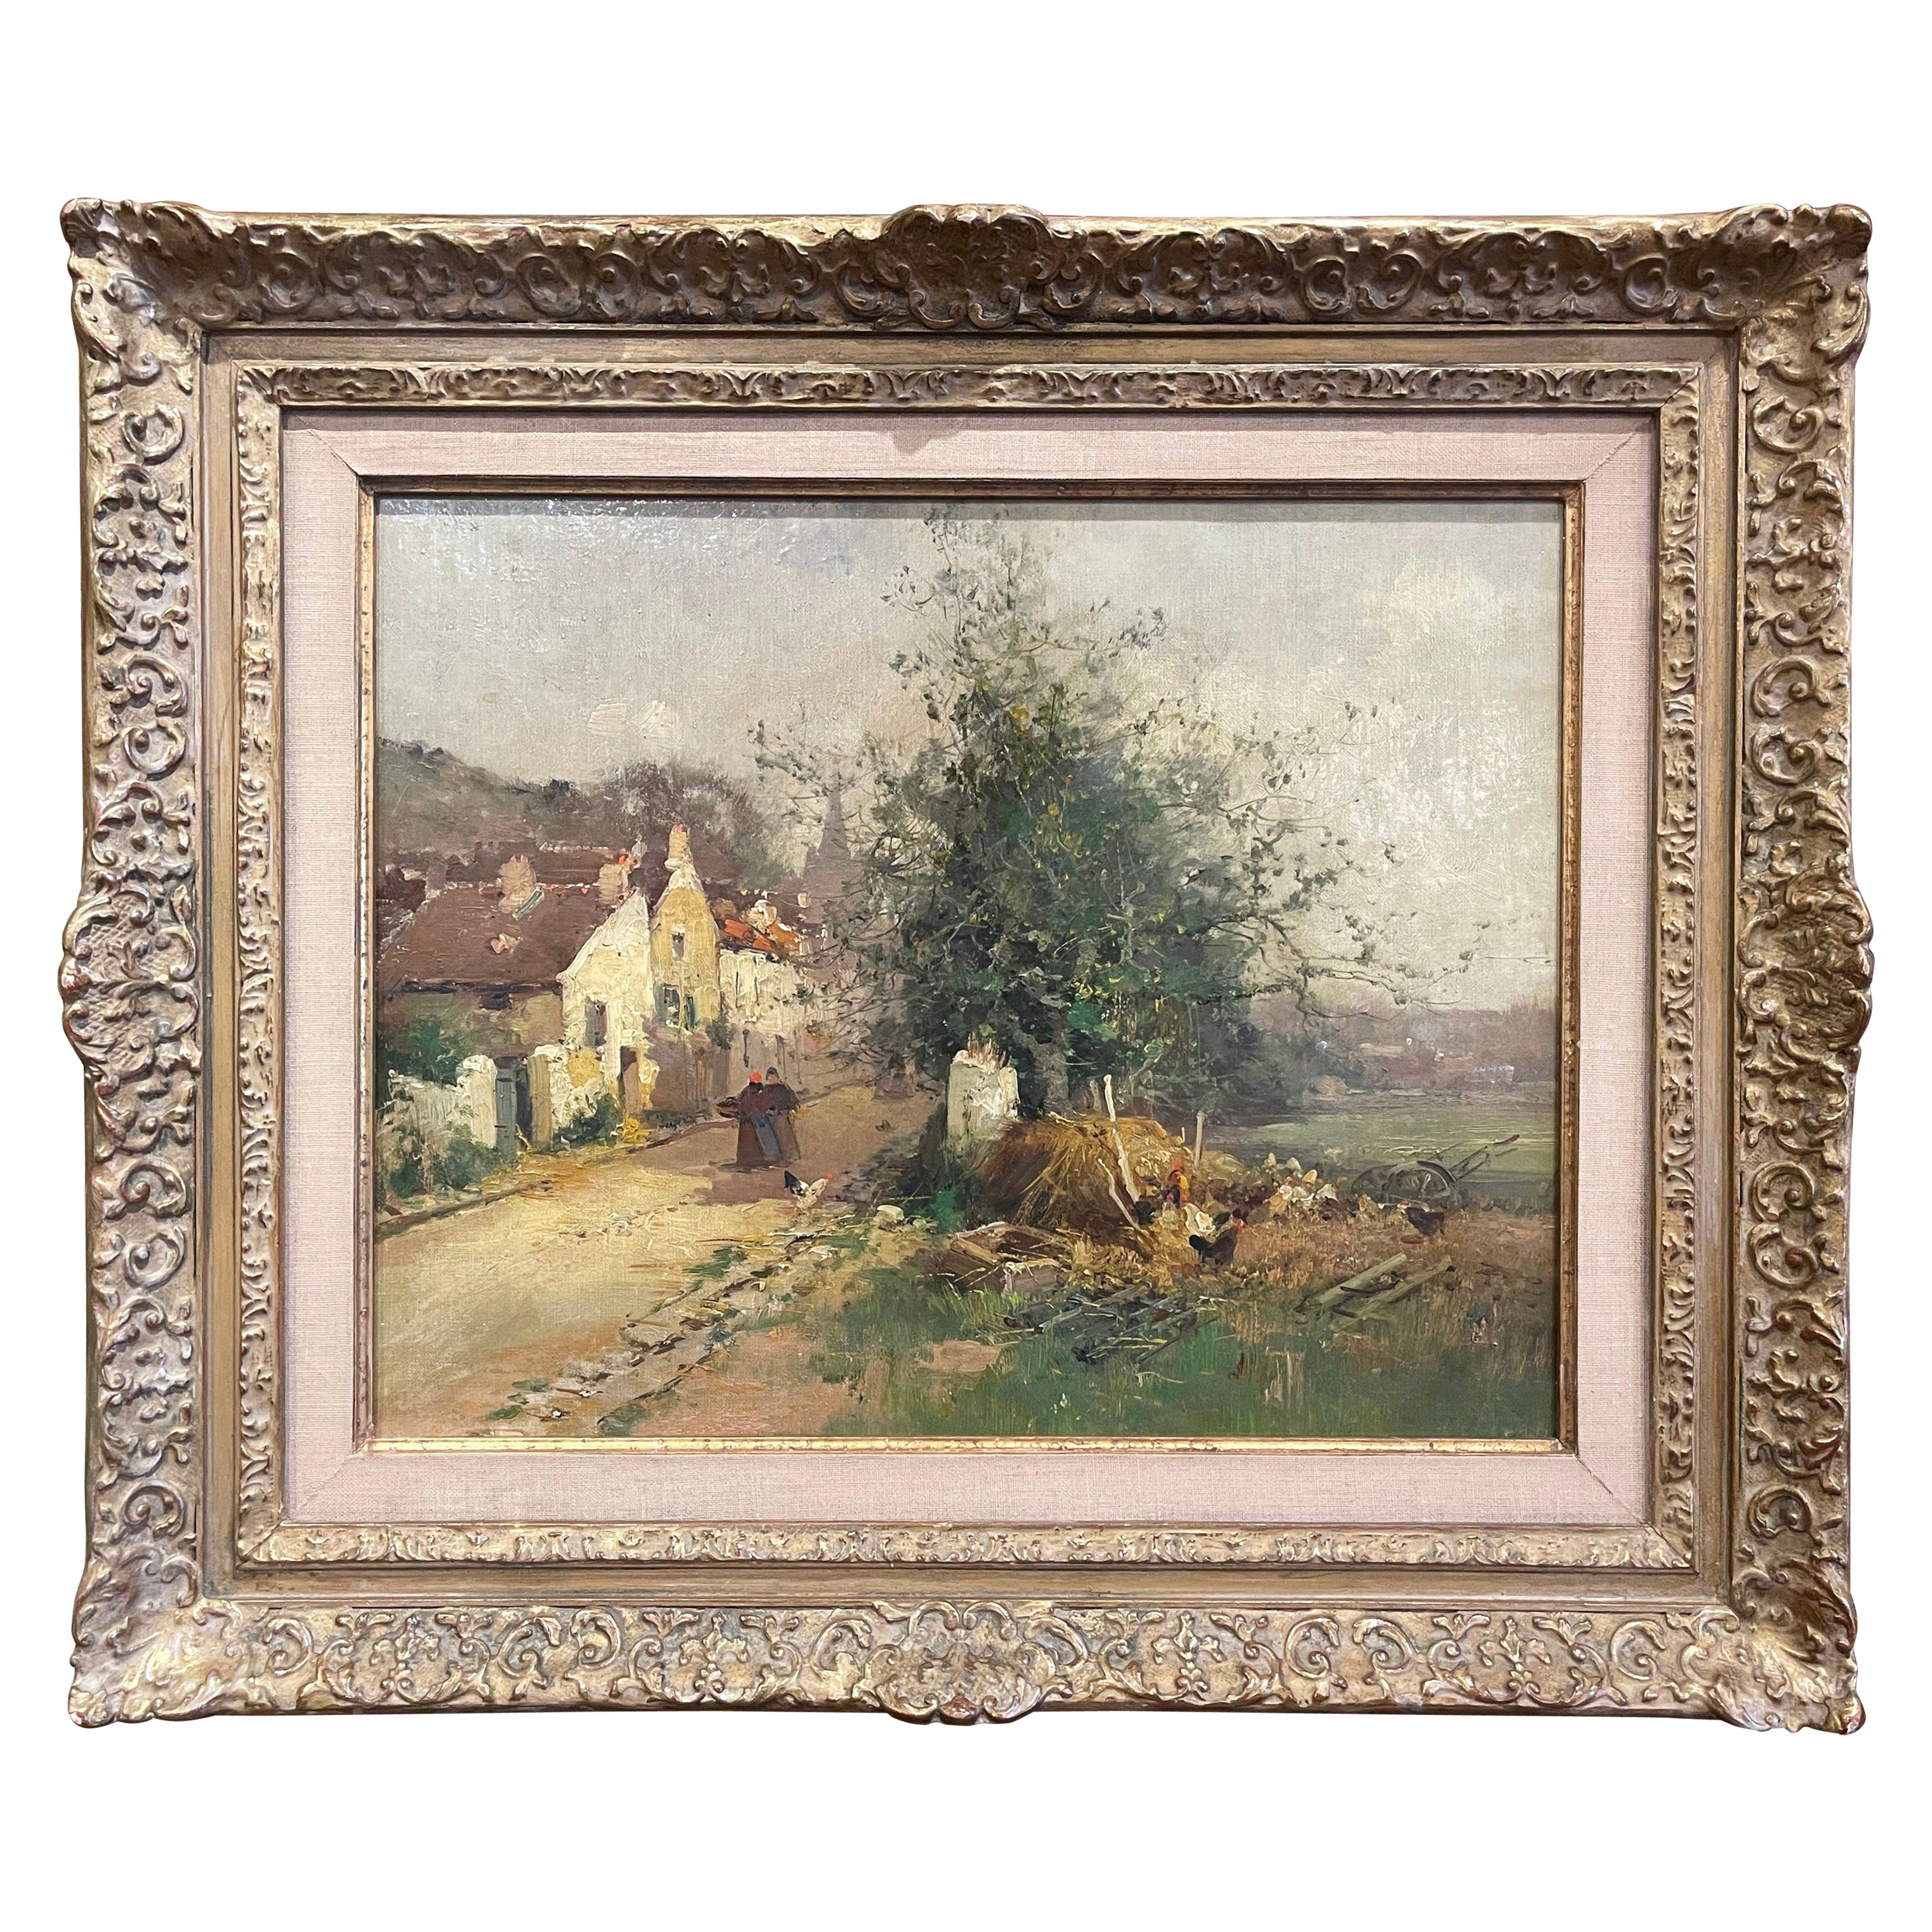 19th Century French Village Oil Painting on Canvas Signed E. Galien-Laloue